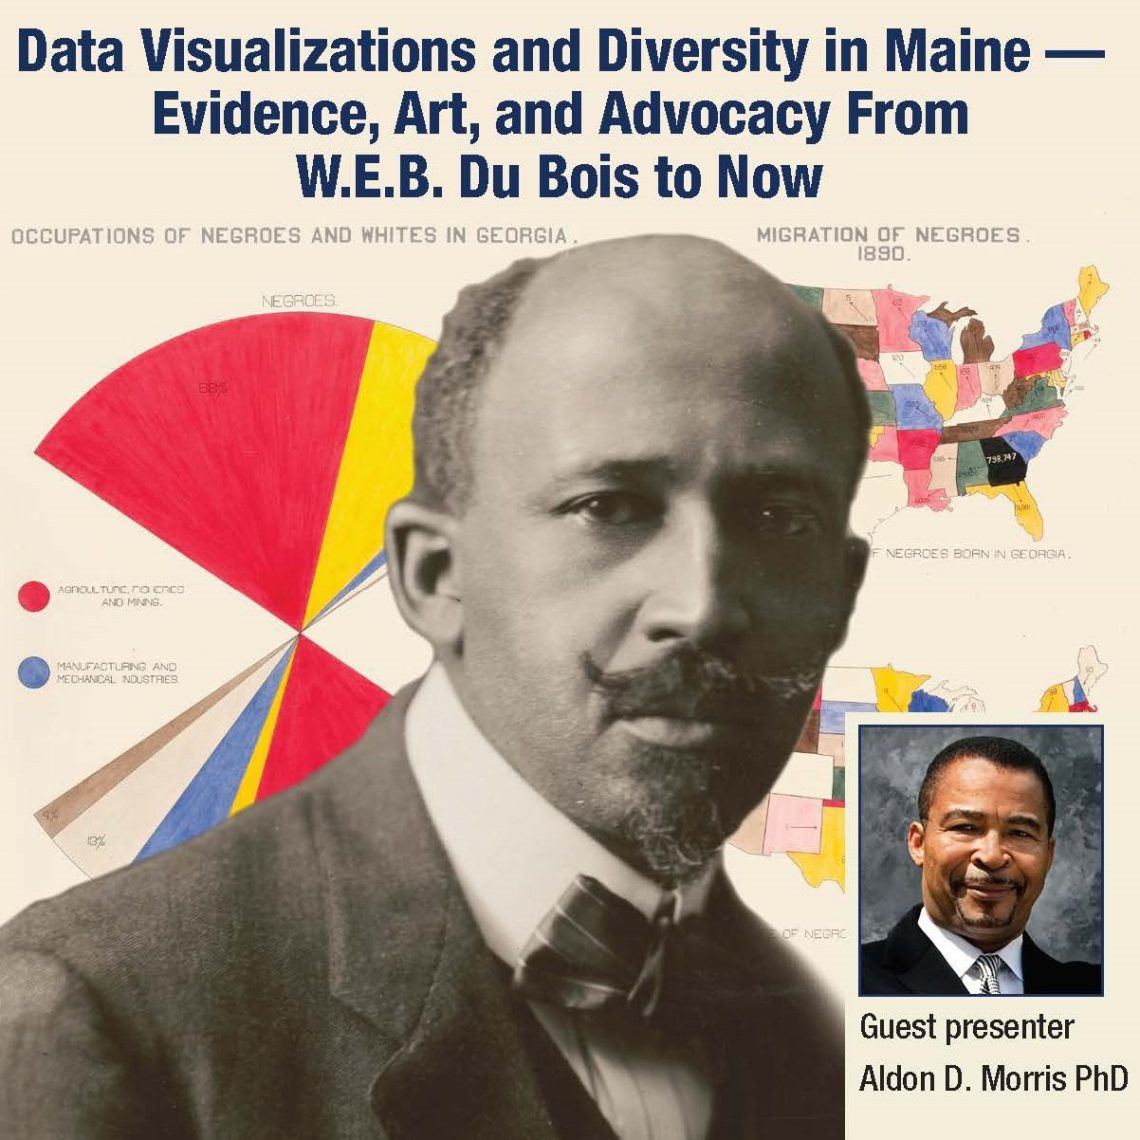 Photo of WEB Du Bois over his own 1900 data visualizations